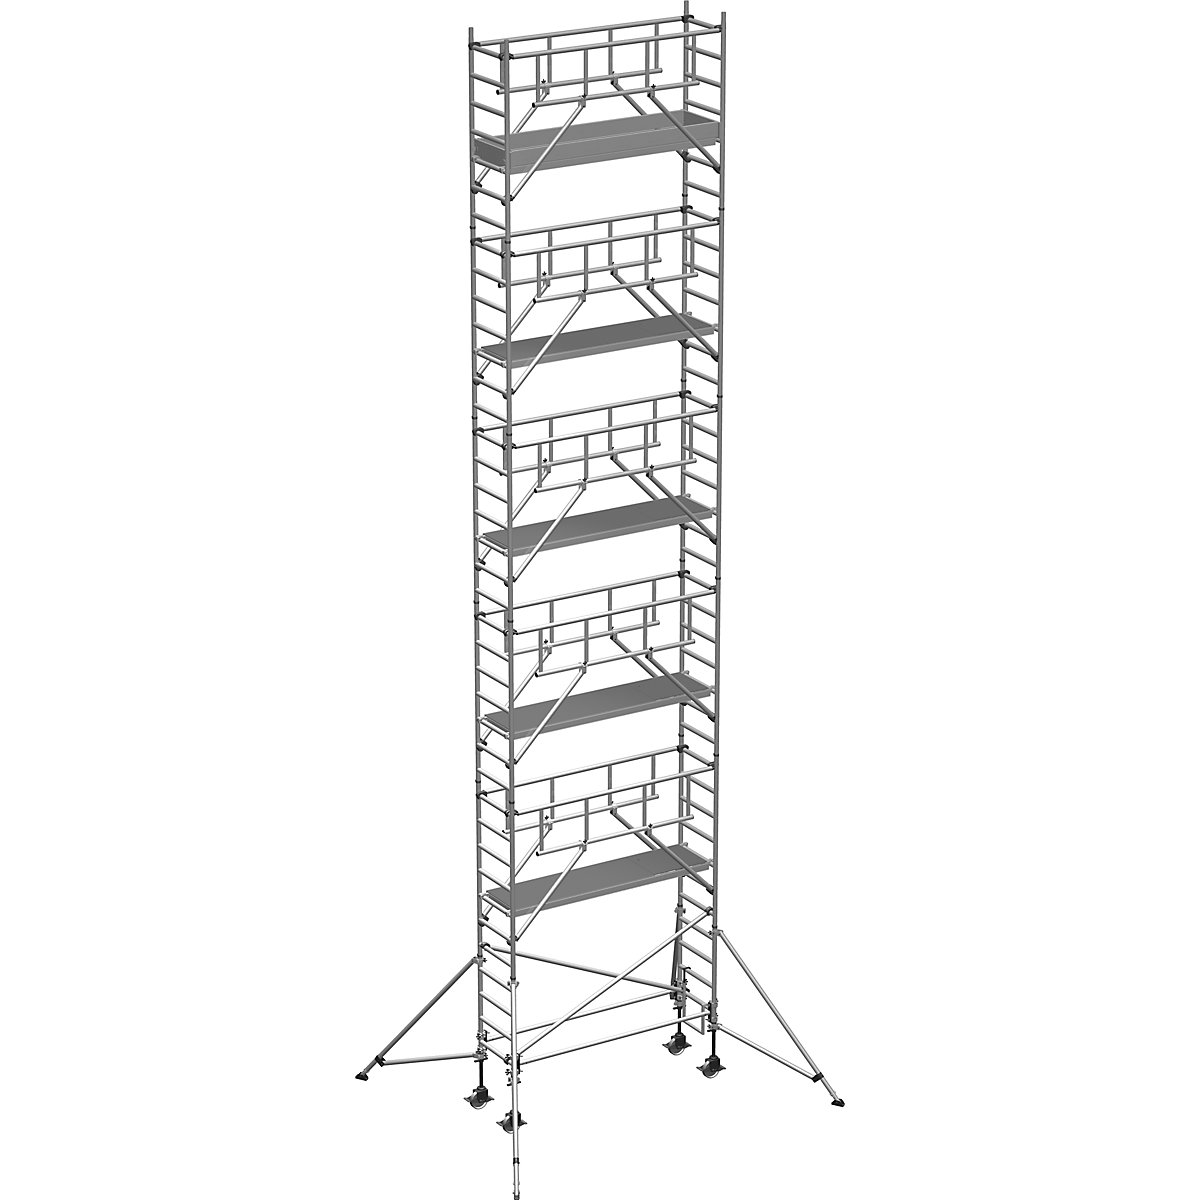 S-PLUS mobile access tower – ZARGES, platform 1.80 x 0.60 m, working height 12.35 m